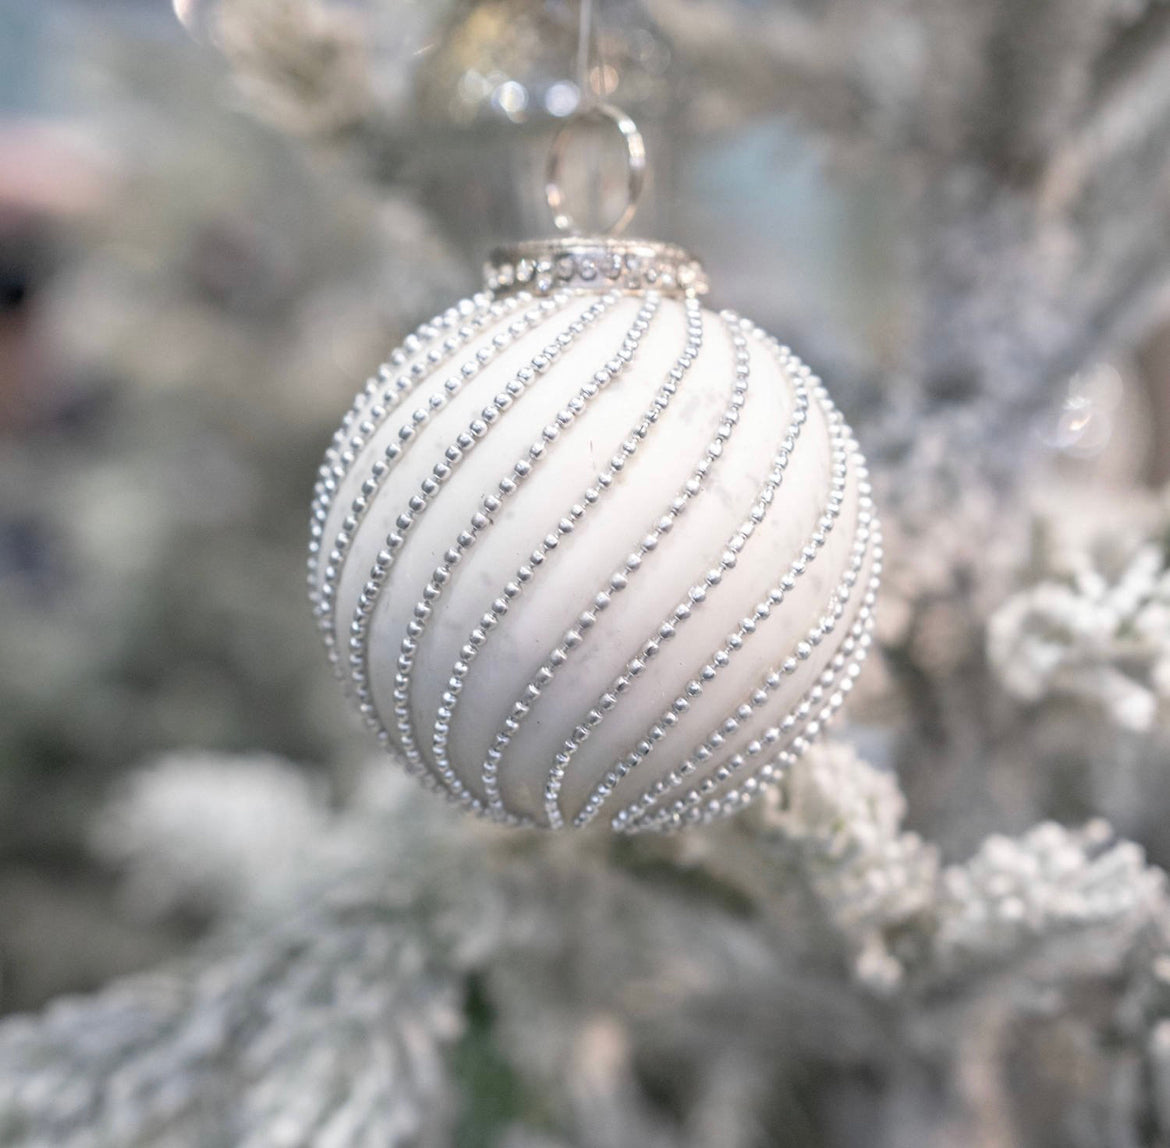 The Noel Collection White Swirl Bauble